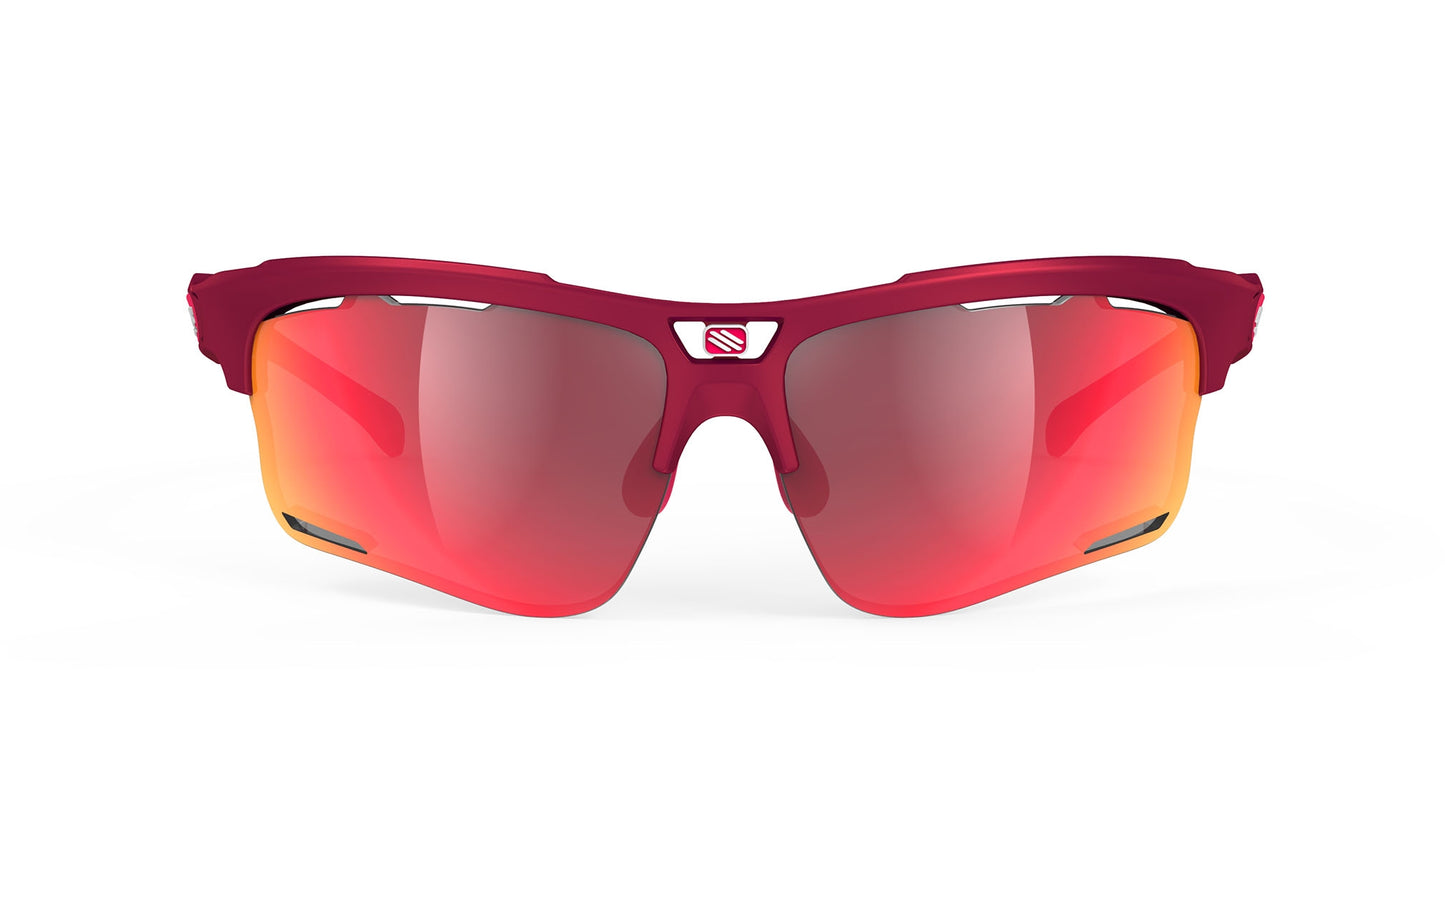 Load image into Gallery viewer, Rudy Project Keyblade Merlot Matte - Multilaser Red Sunglasses
